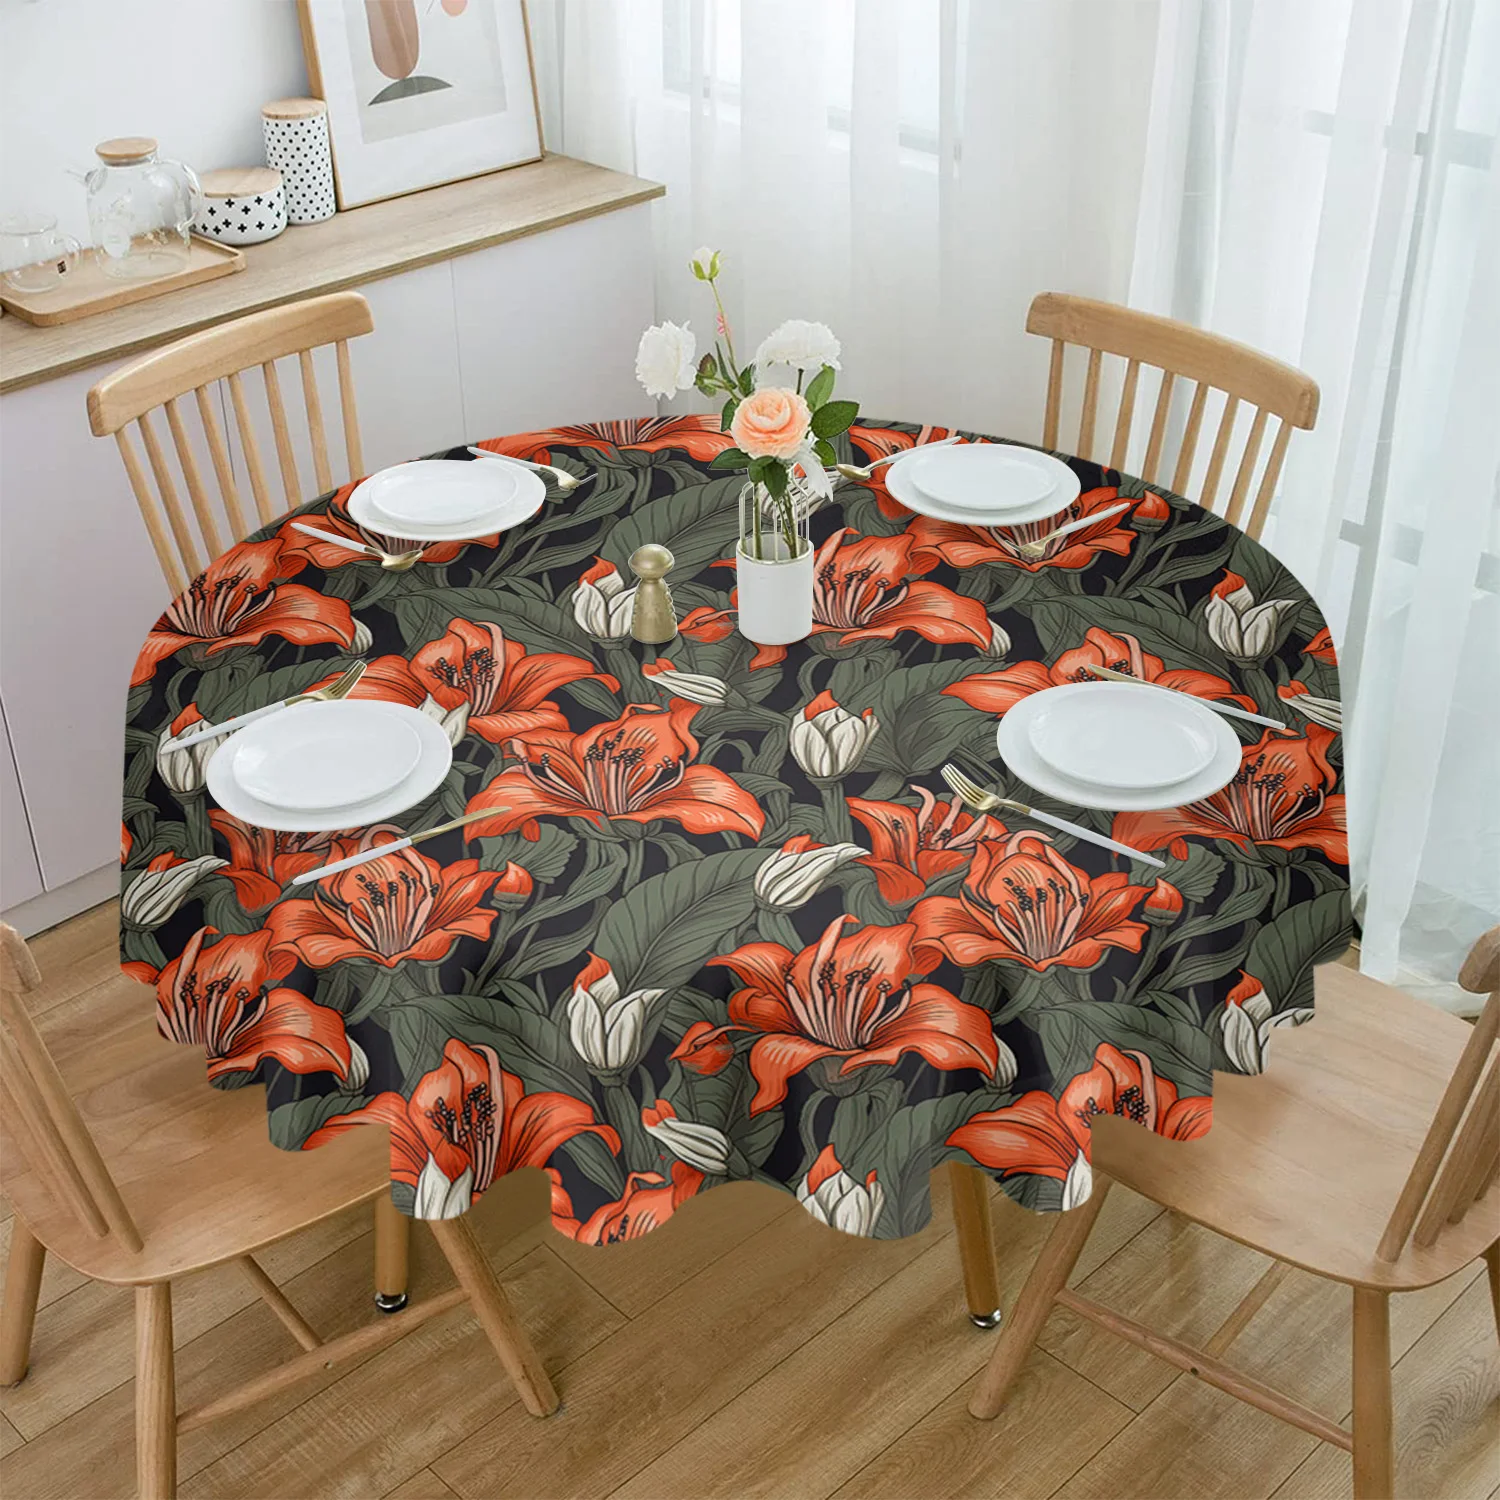 

Red Flowers Foliage Round Tablecloth Party Kitchen Dinner Table Cover Holiday Decor Waterproof Tablecloths